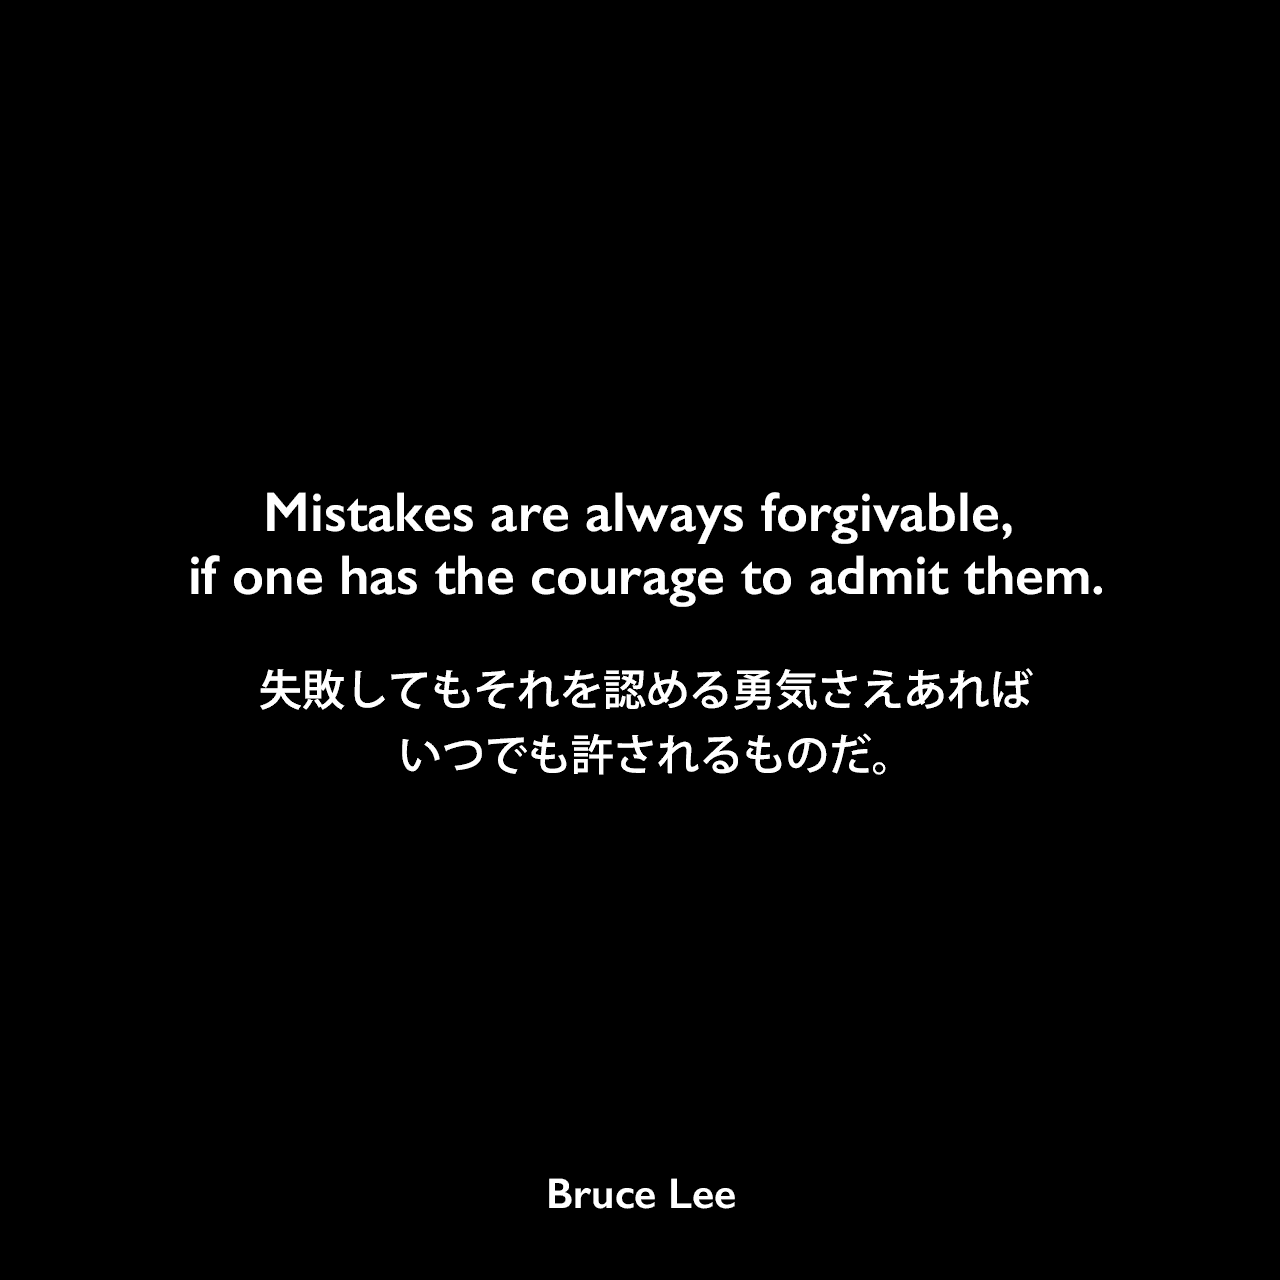 Mistakes are always forgivable, if one has the courage to admit them.失敗してもそれを認める勇気さえあれば、いつでも許されるものだ。Bruce Lee